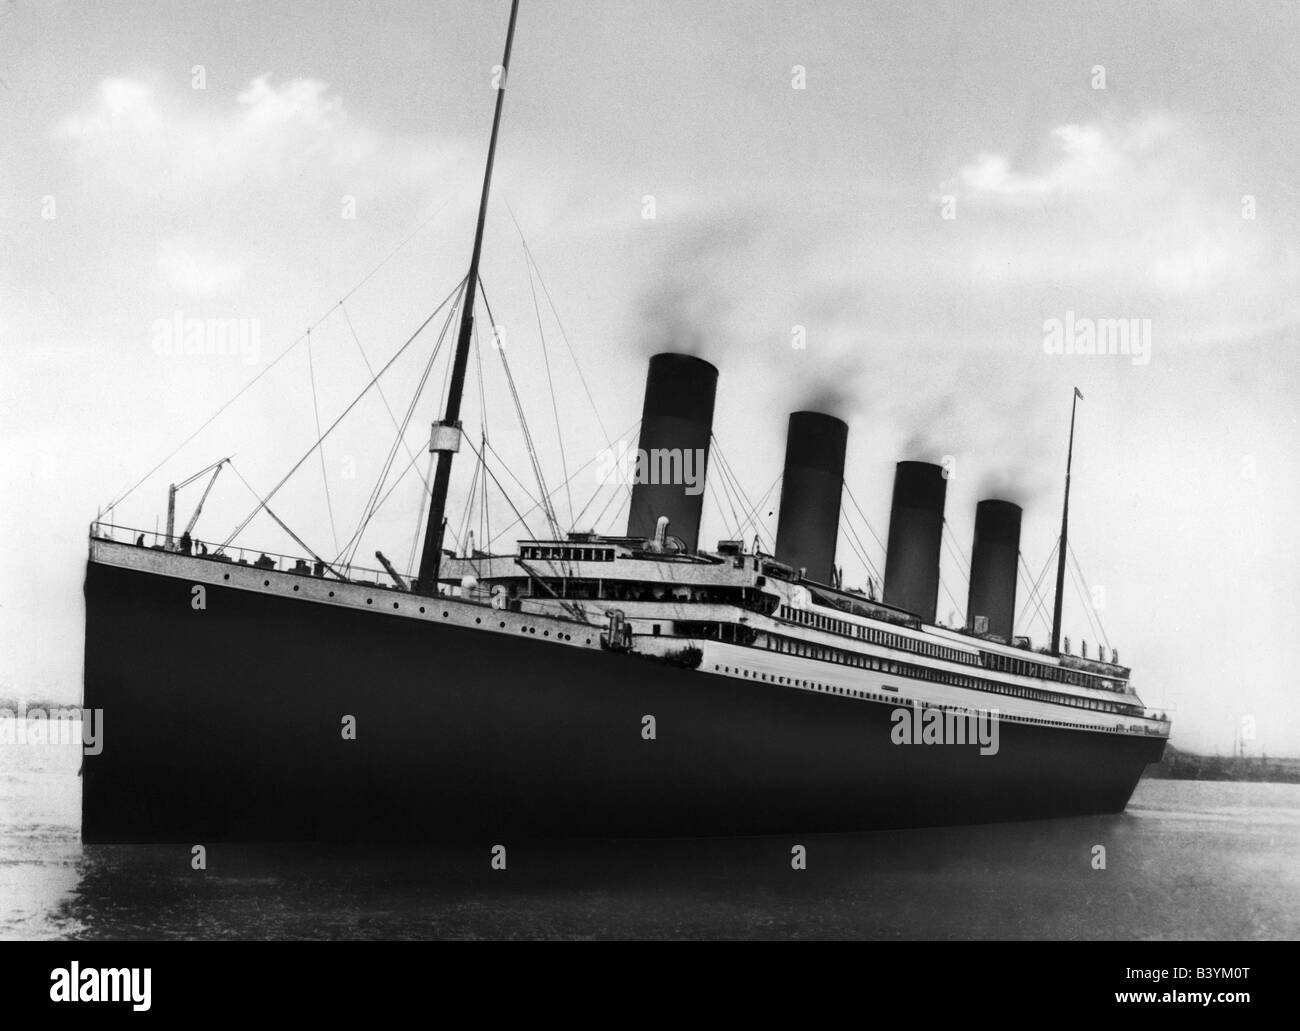 1912 New 5x7 Photo Side View of RMS TITANIC Ship Ill-Fated Ocean Liner